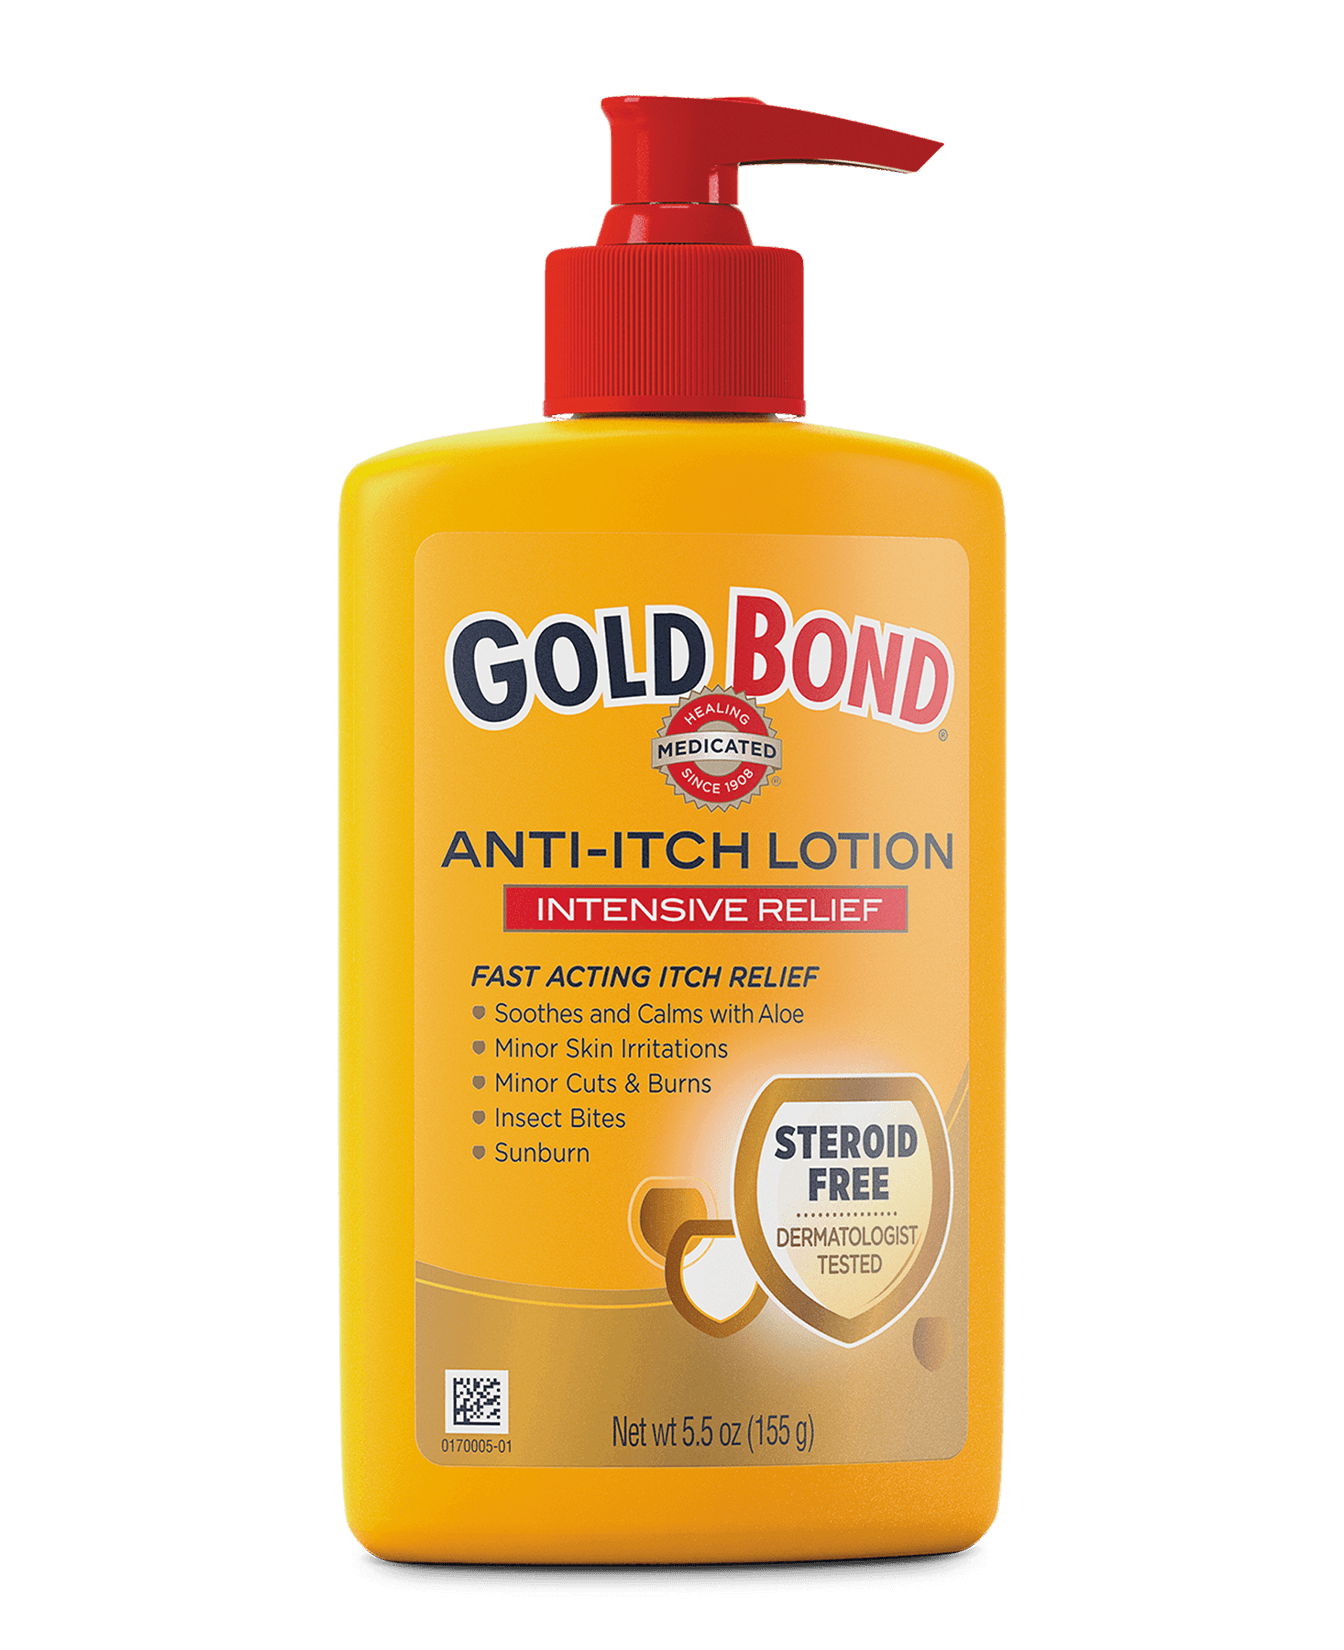 medicated-anti-itch-lotion-gold-bond